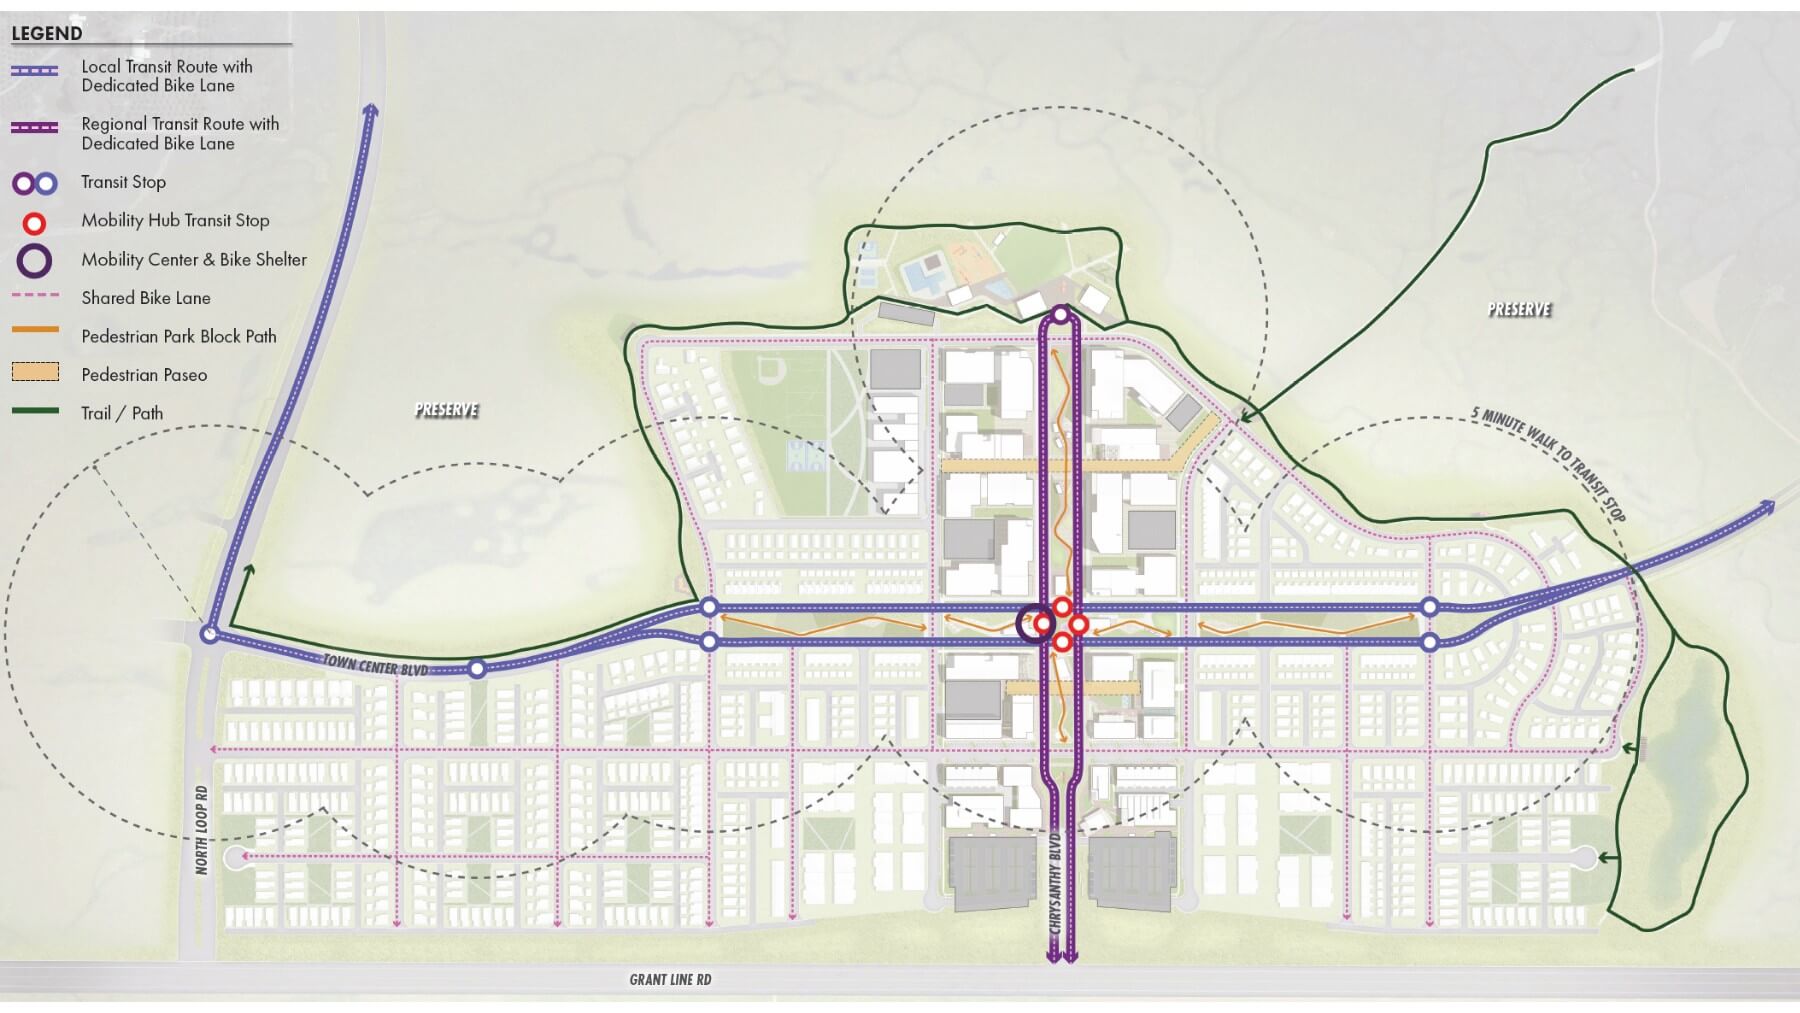 A map of Braden's transit routes and multi-modal hub for a town center where the car takes a backseat